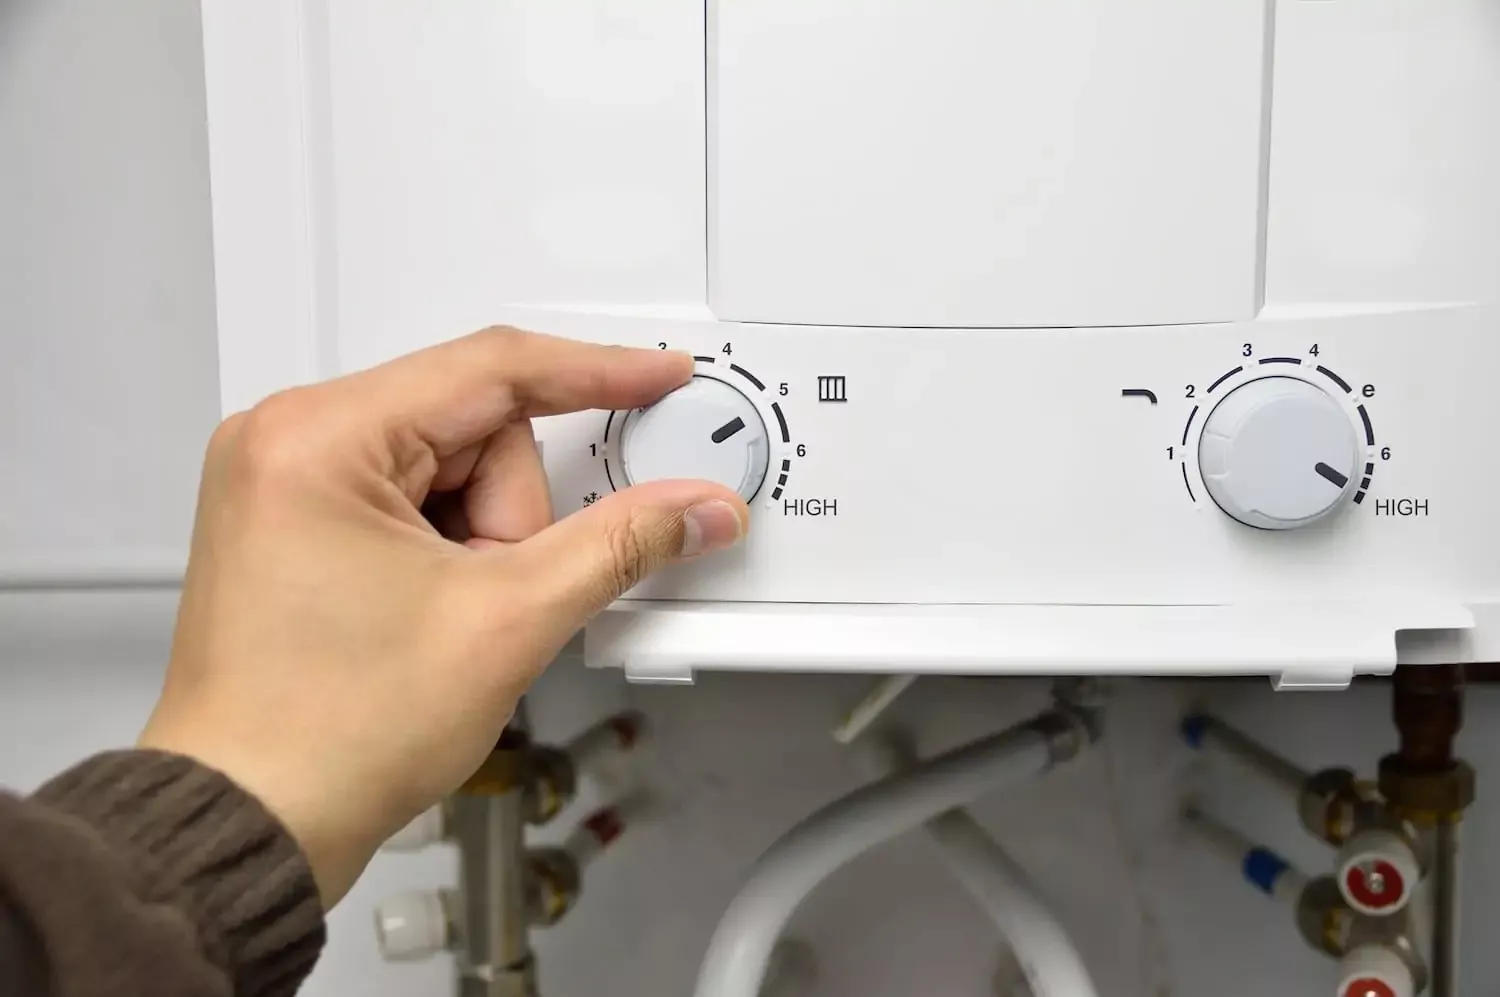  A hand adjusting a knob on a tankless water heater. 